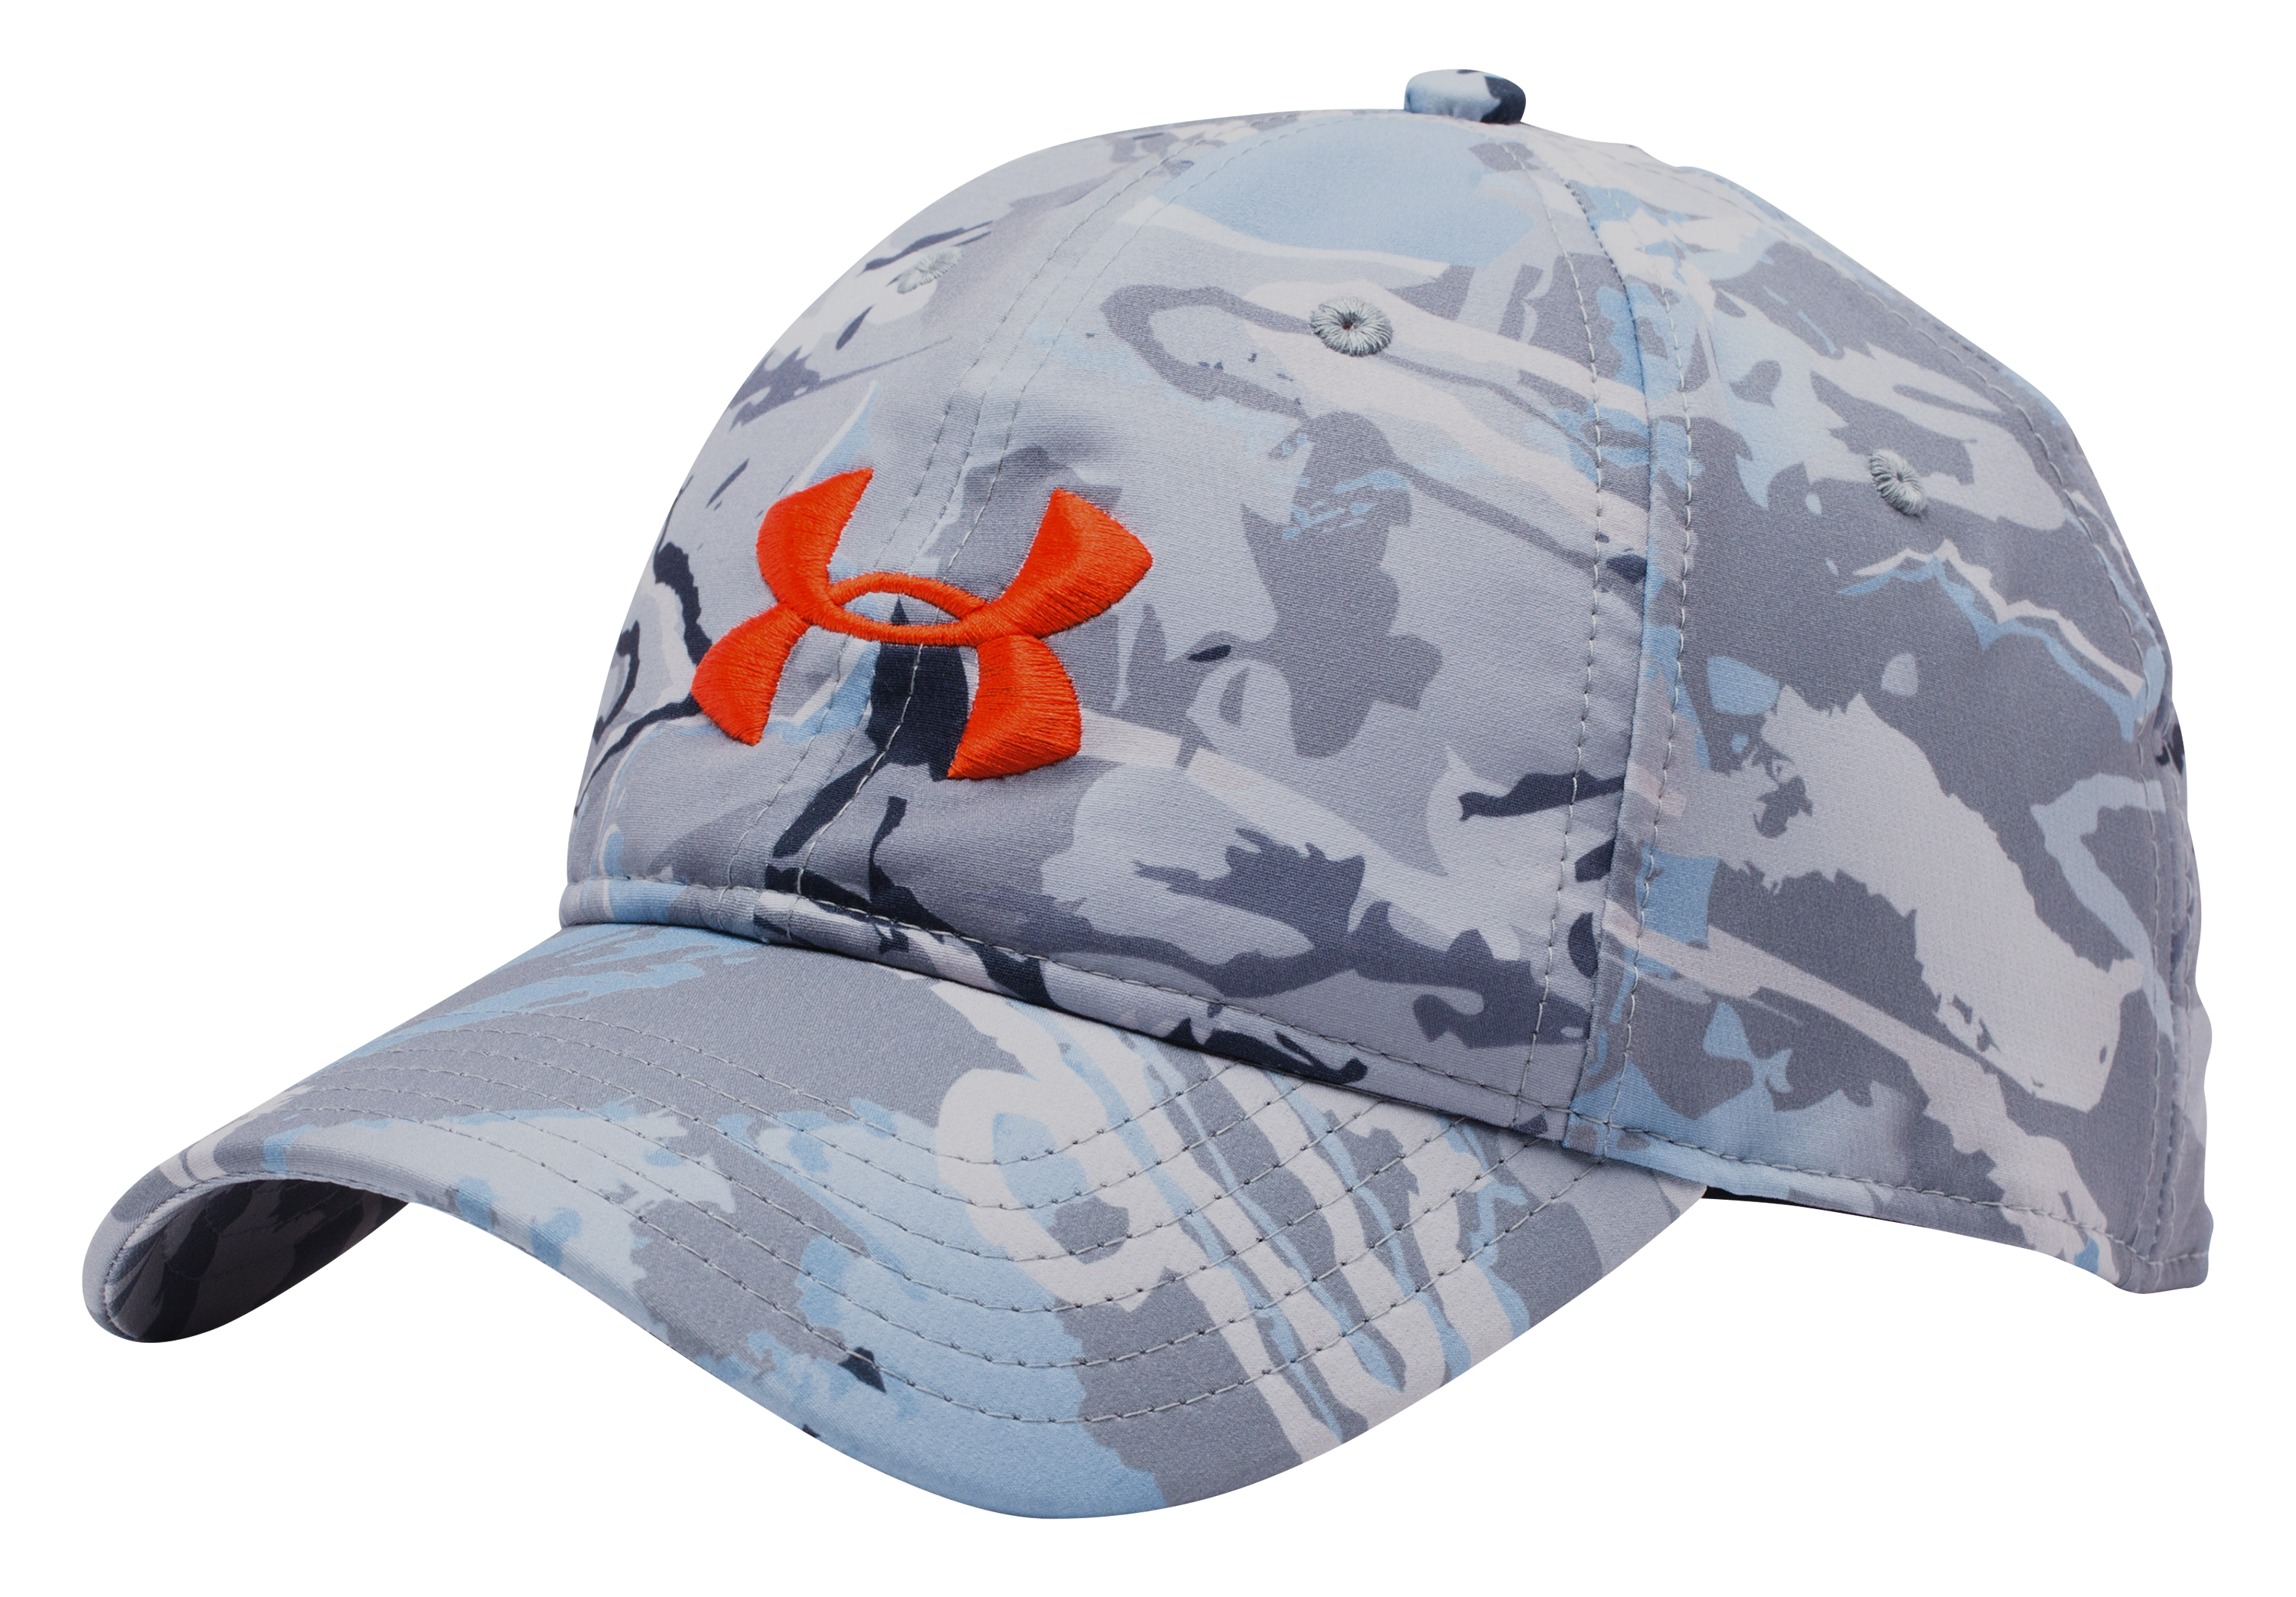 Under Armour Fishing Camo Cap - Adjustable Back (For Men)